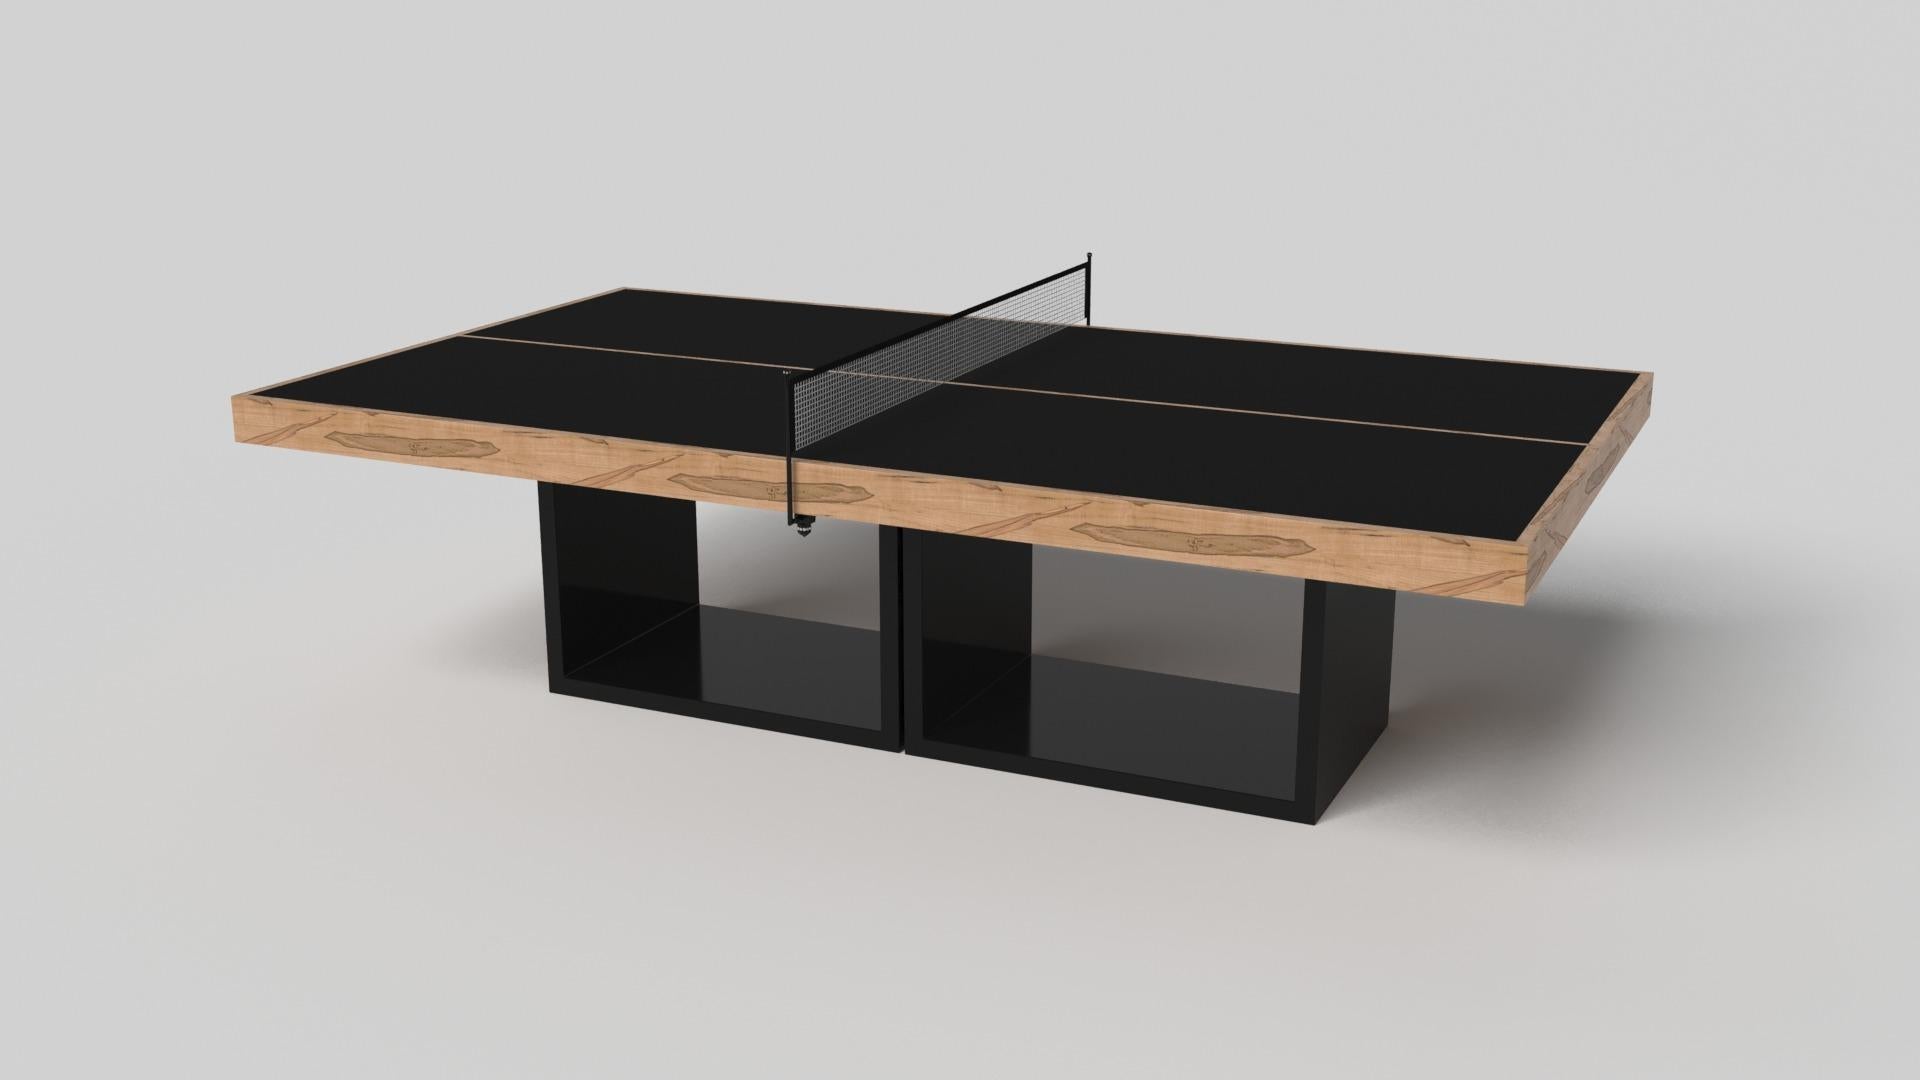 Supported by two rectangular open pedestals as the base, this handcrafted table tennis table is modern and minimalistic with its combination of simple, geometric forms. Viewed from the front, the use of negative space is evident; viewed from the